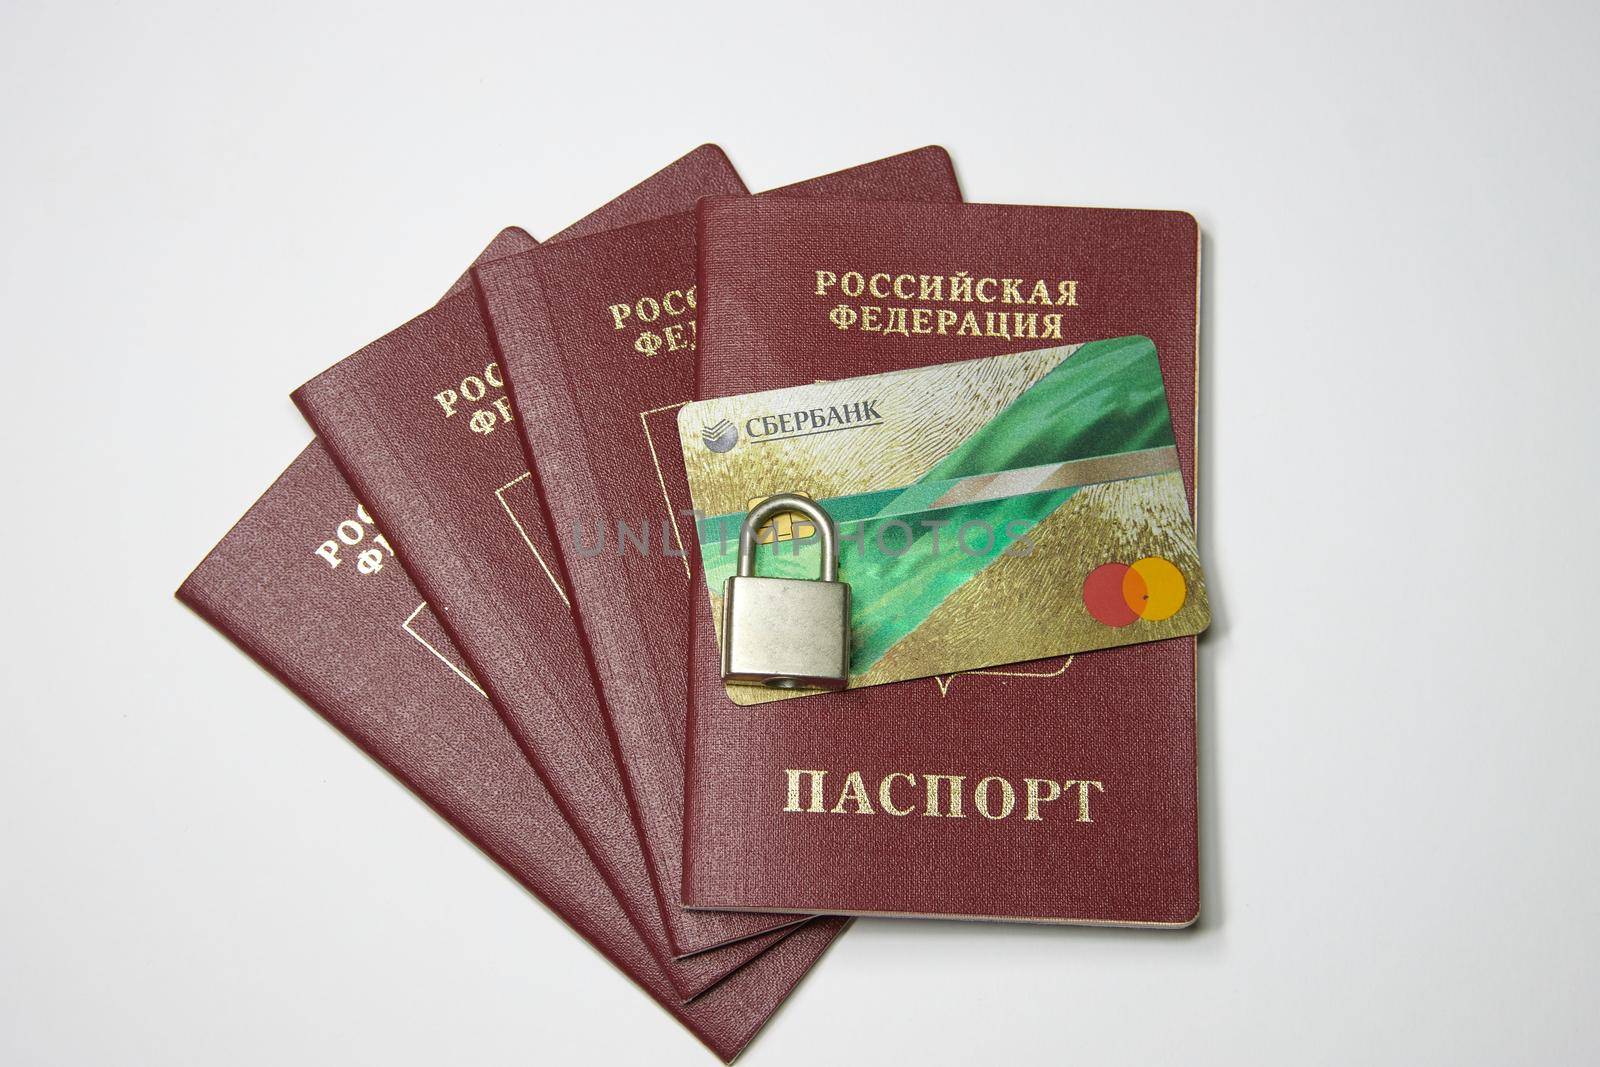 Russia, Syzran - FEBRUARY 27, 2022: sanctions against Sberbank. ban on leaving Russia, passports and bank cards under lock and key by vadiar